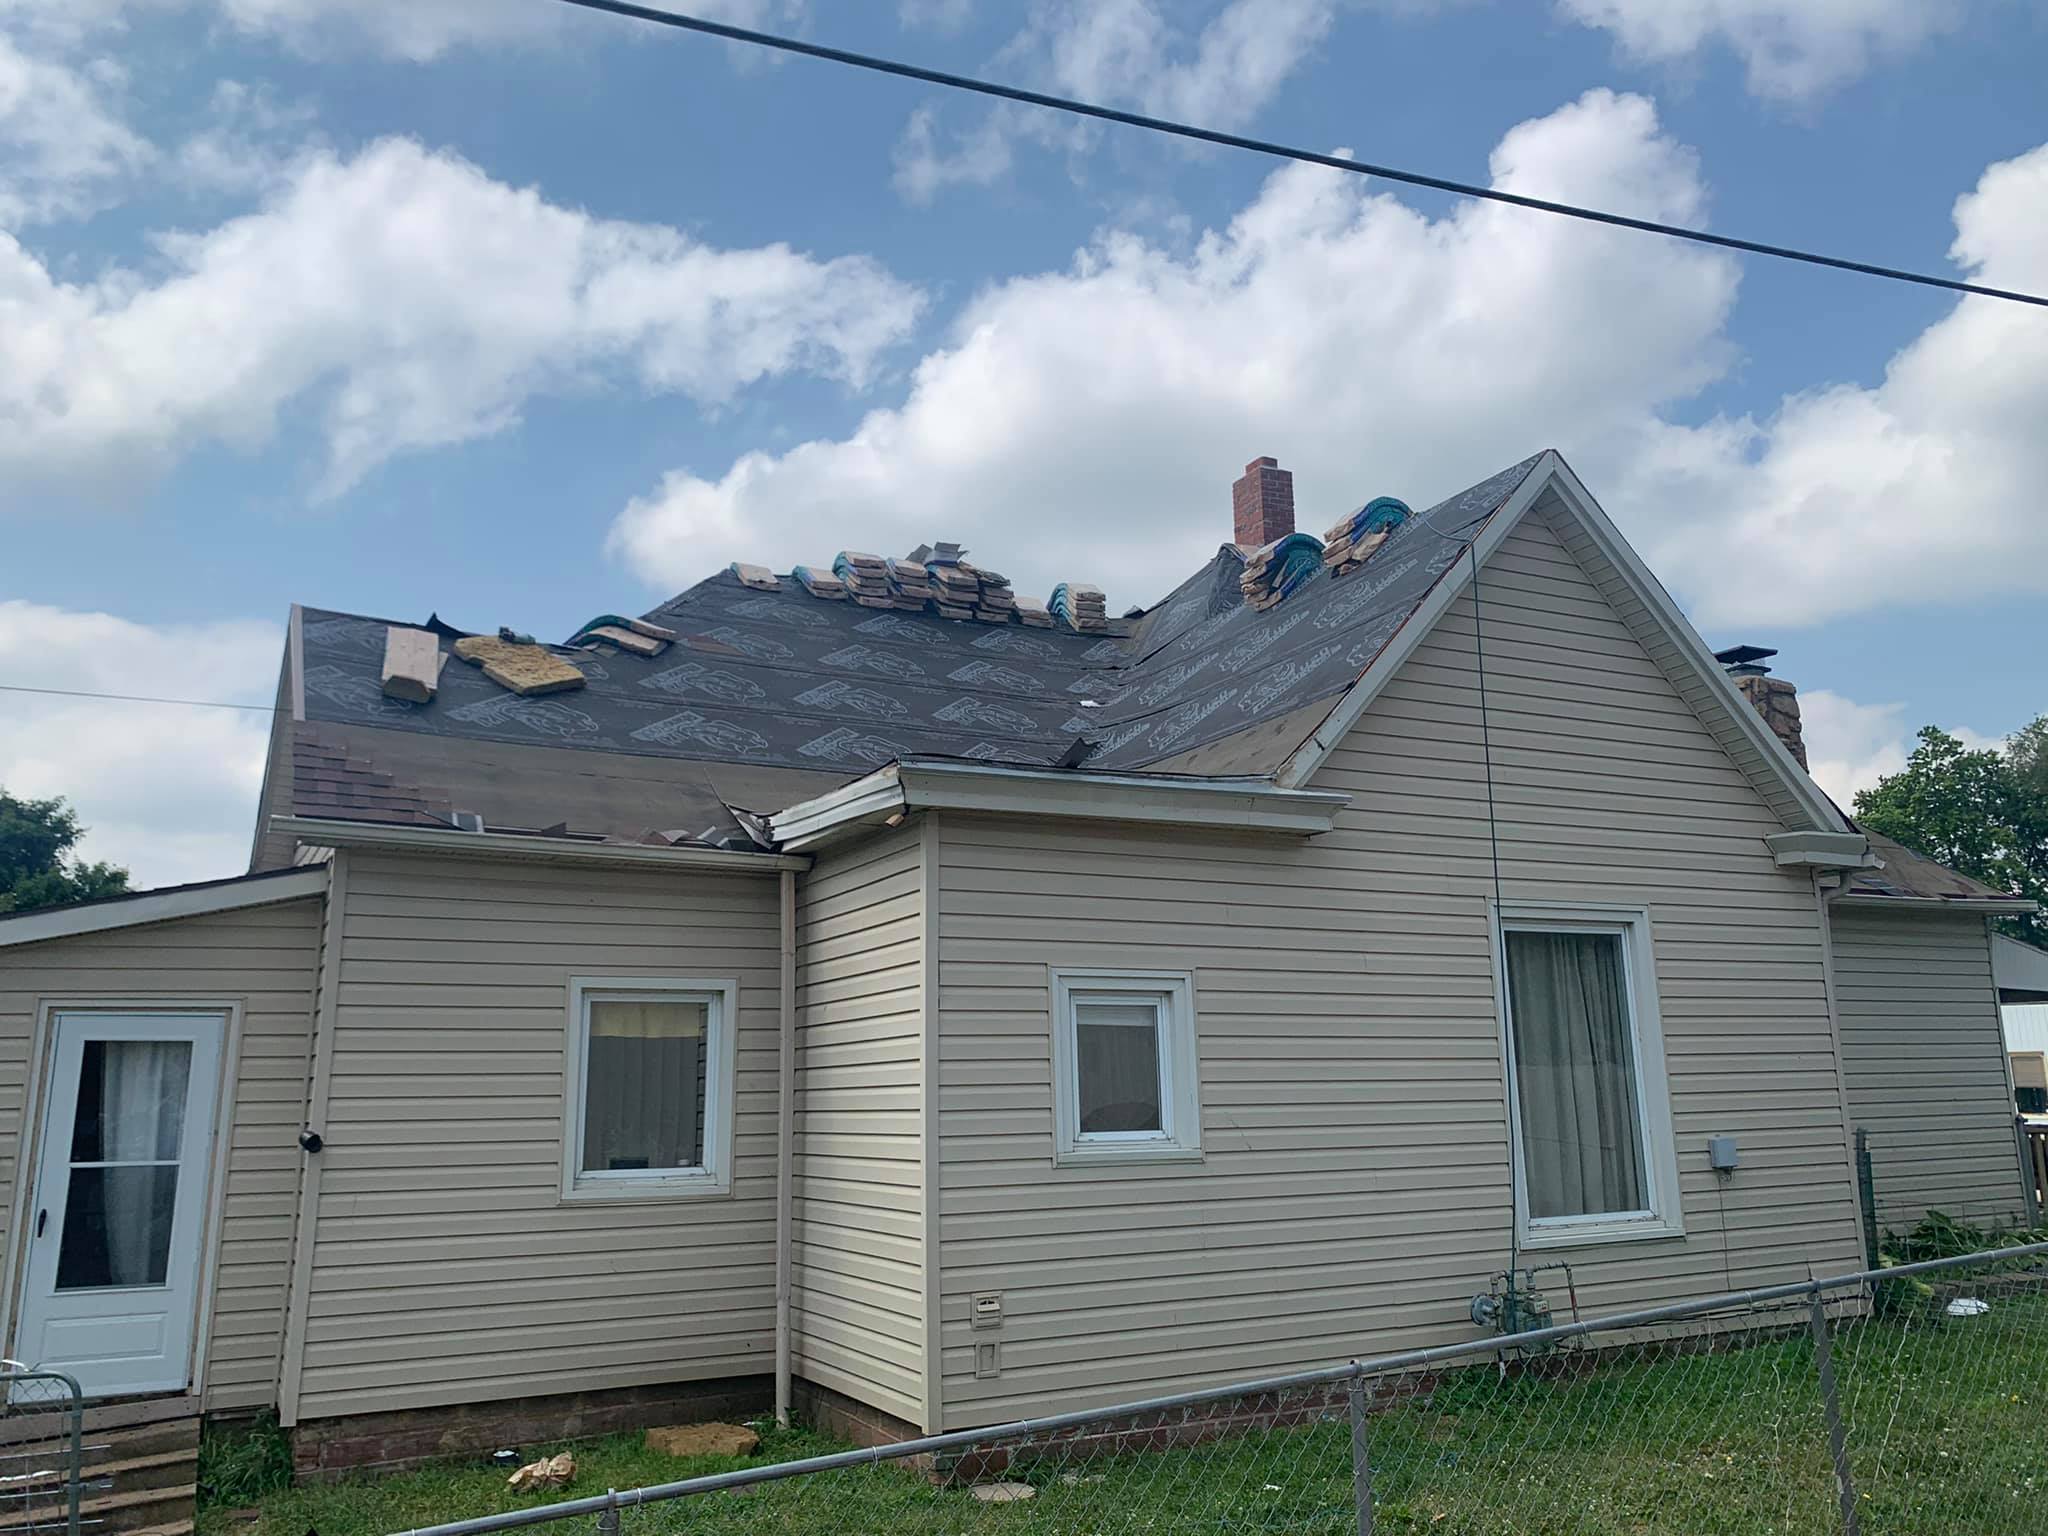 Roofing Companies Basehor Kansas - Questions To Ask